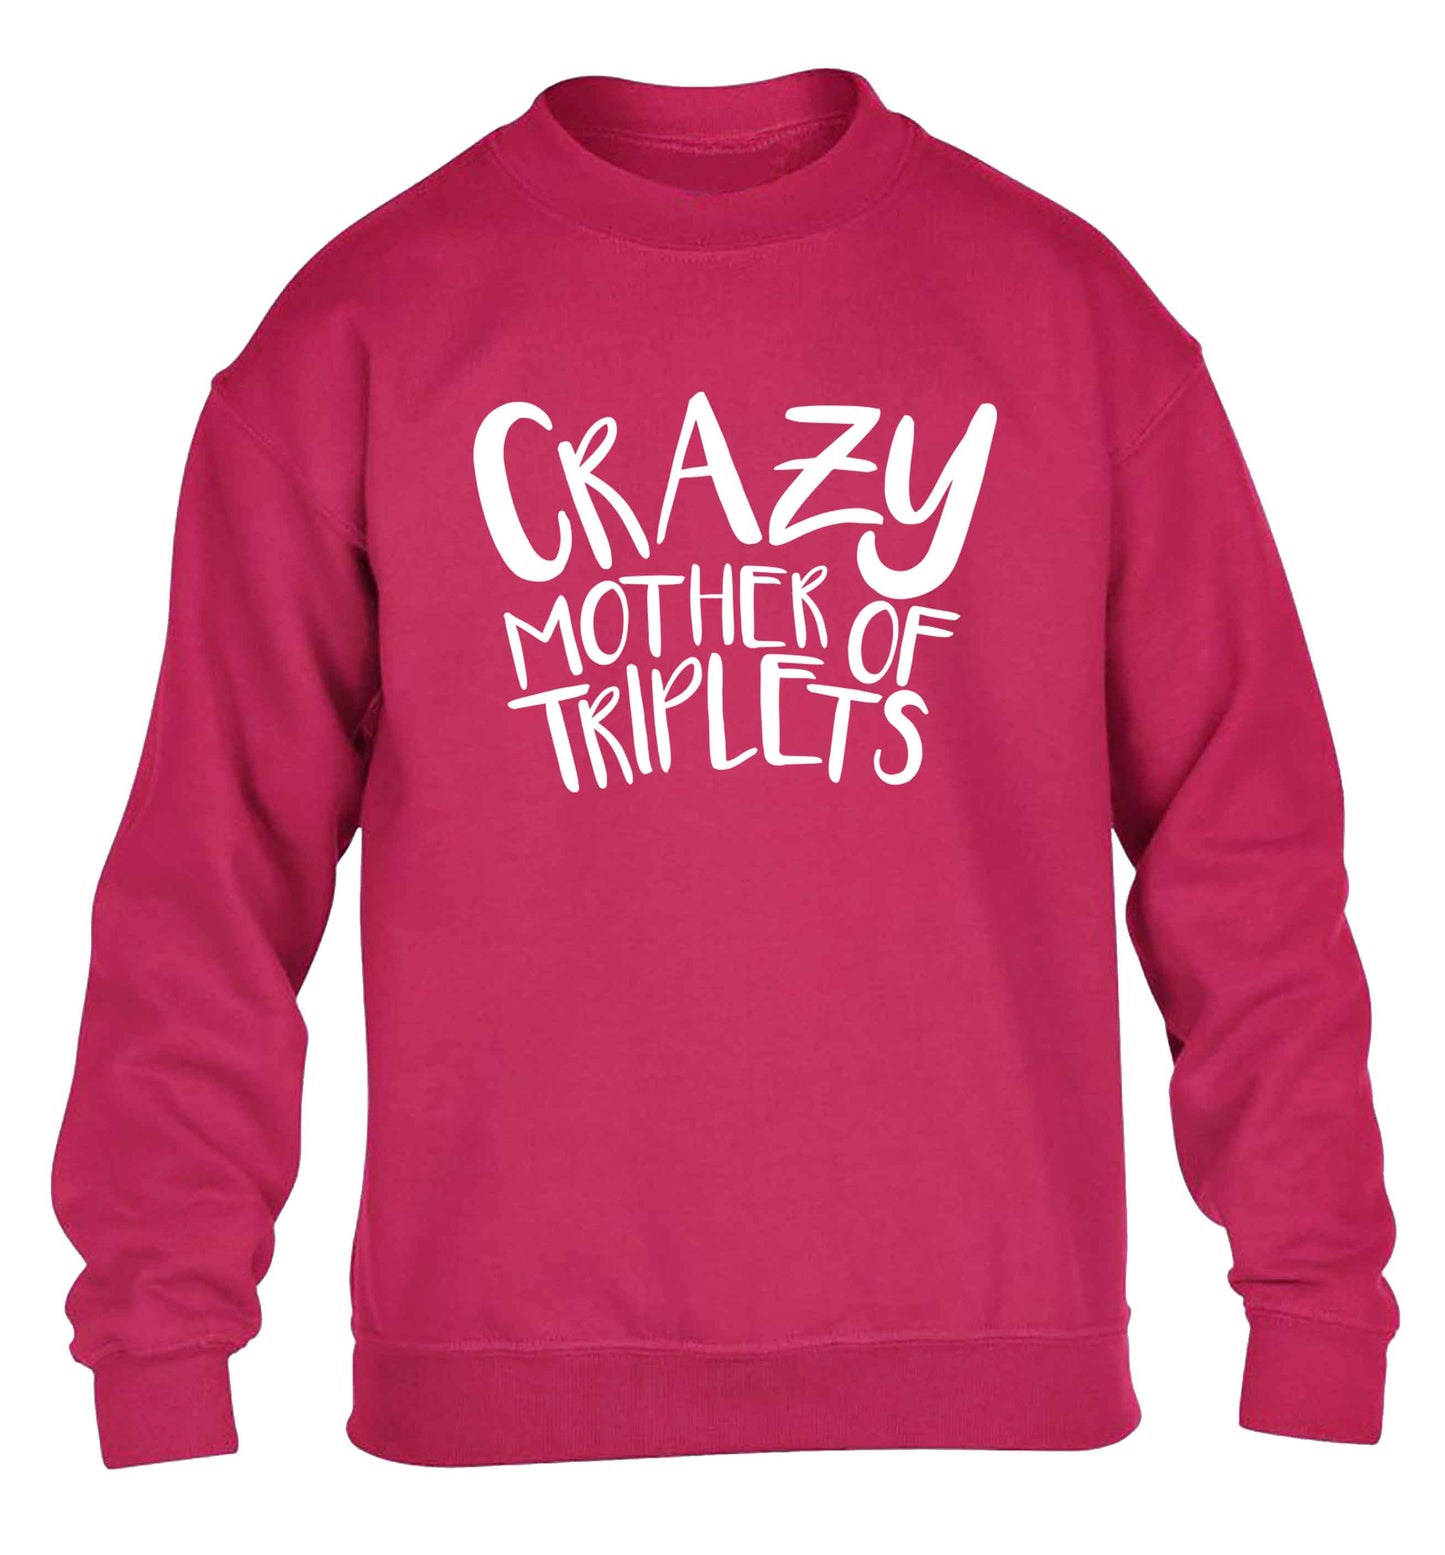 Crazy mother of triplets children's pink sweater 12-13 Years